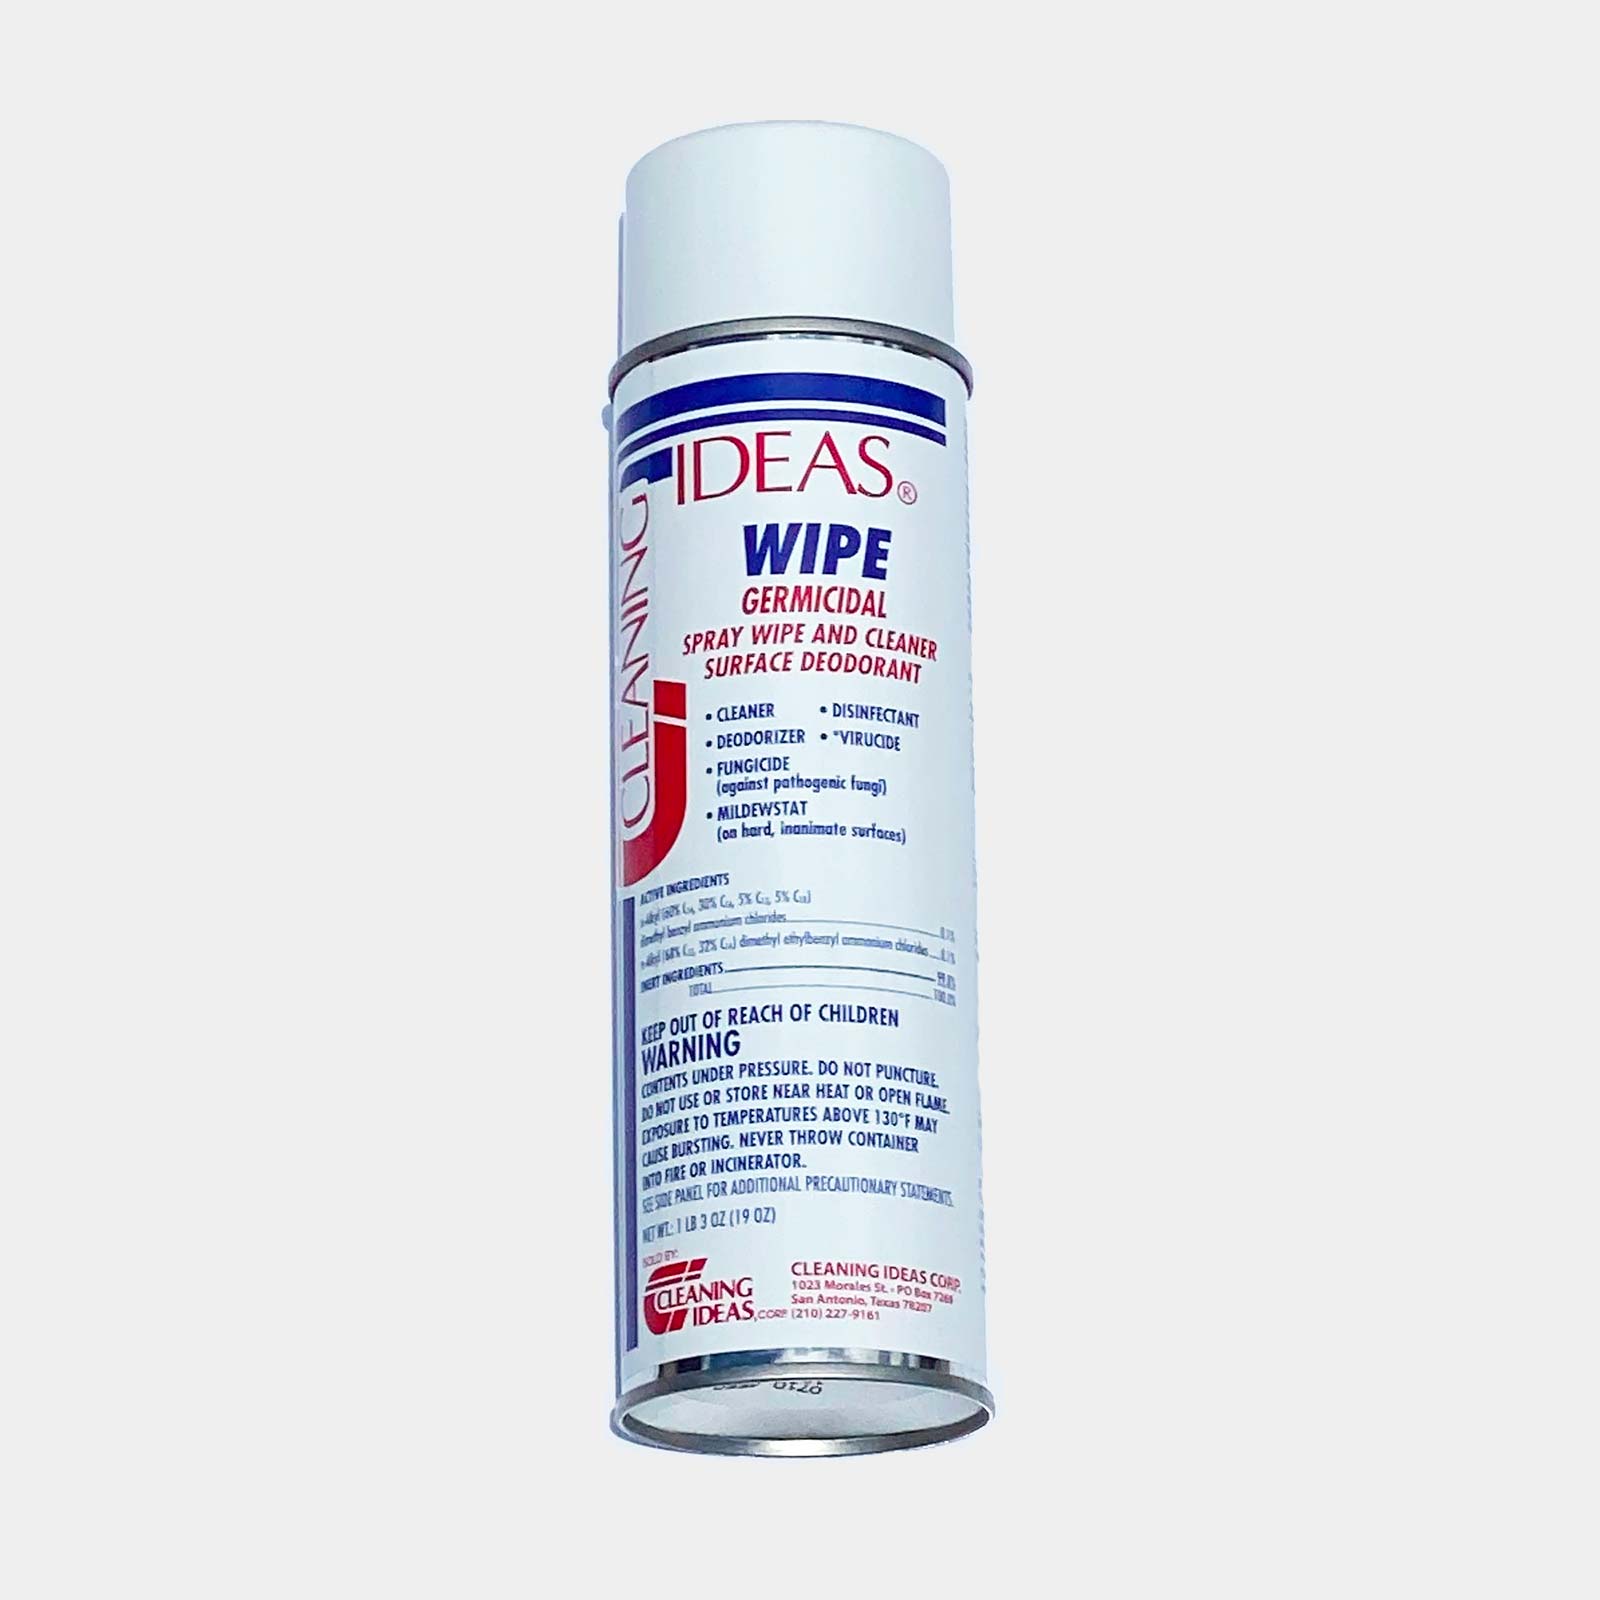 CLEANING IDEAS WIPE GERMICIDAL SPRAY WIPE AND  CLEANER SURFACE DEODORANT (ONLY AVAILABLE IN TEXAS)